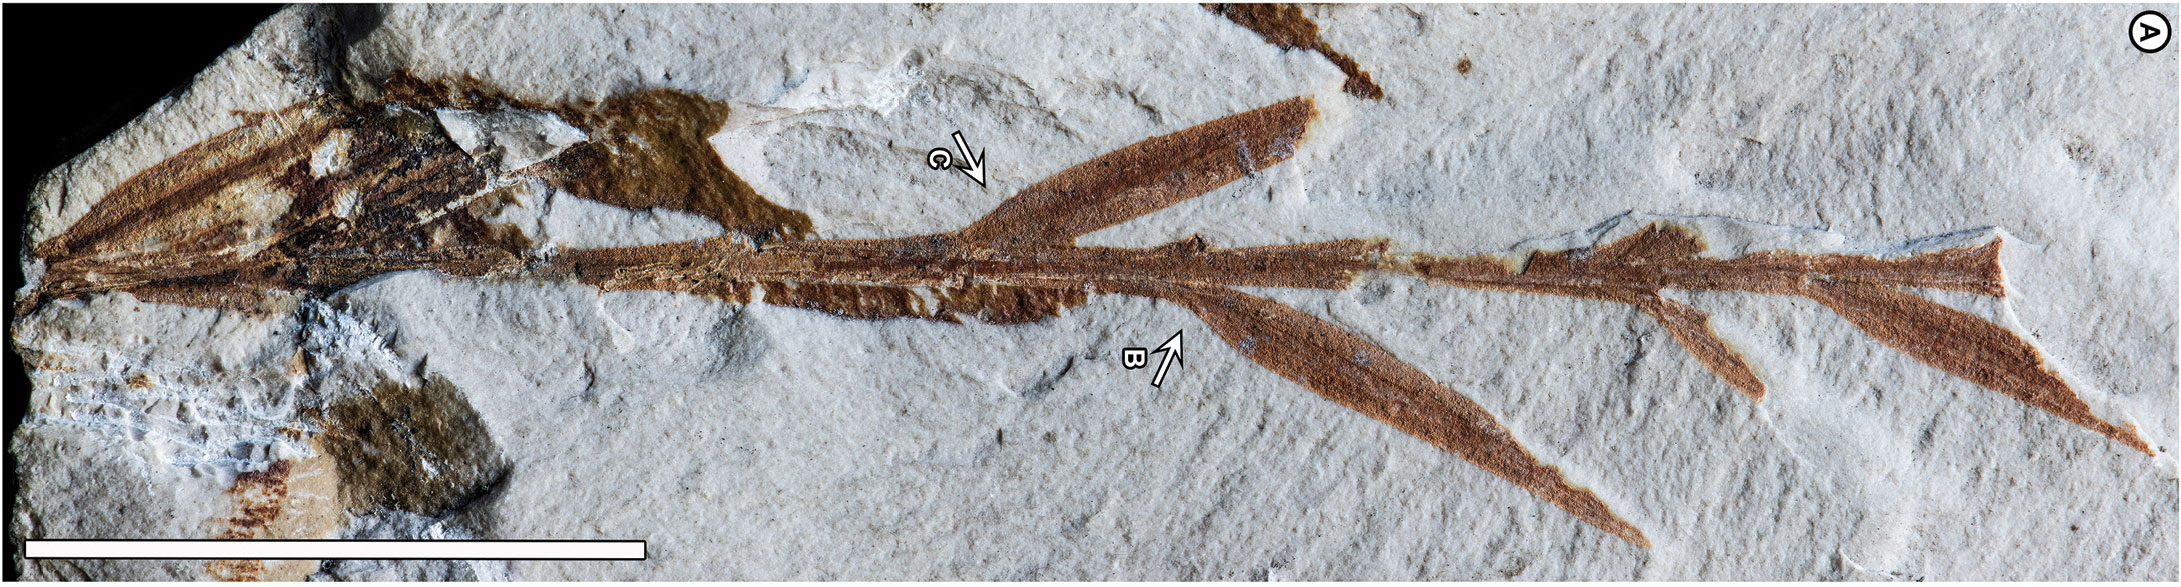 Photograph of a fossil from the Eocene of Patagonia, Argentina. This fossil was formerly thought to be a grass, but is now thought to be a conifer. The photo shows a brown branch with alternate linear leaves preserved on a white rock.